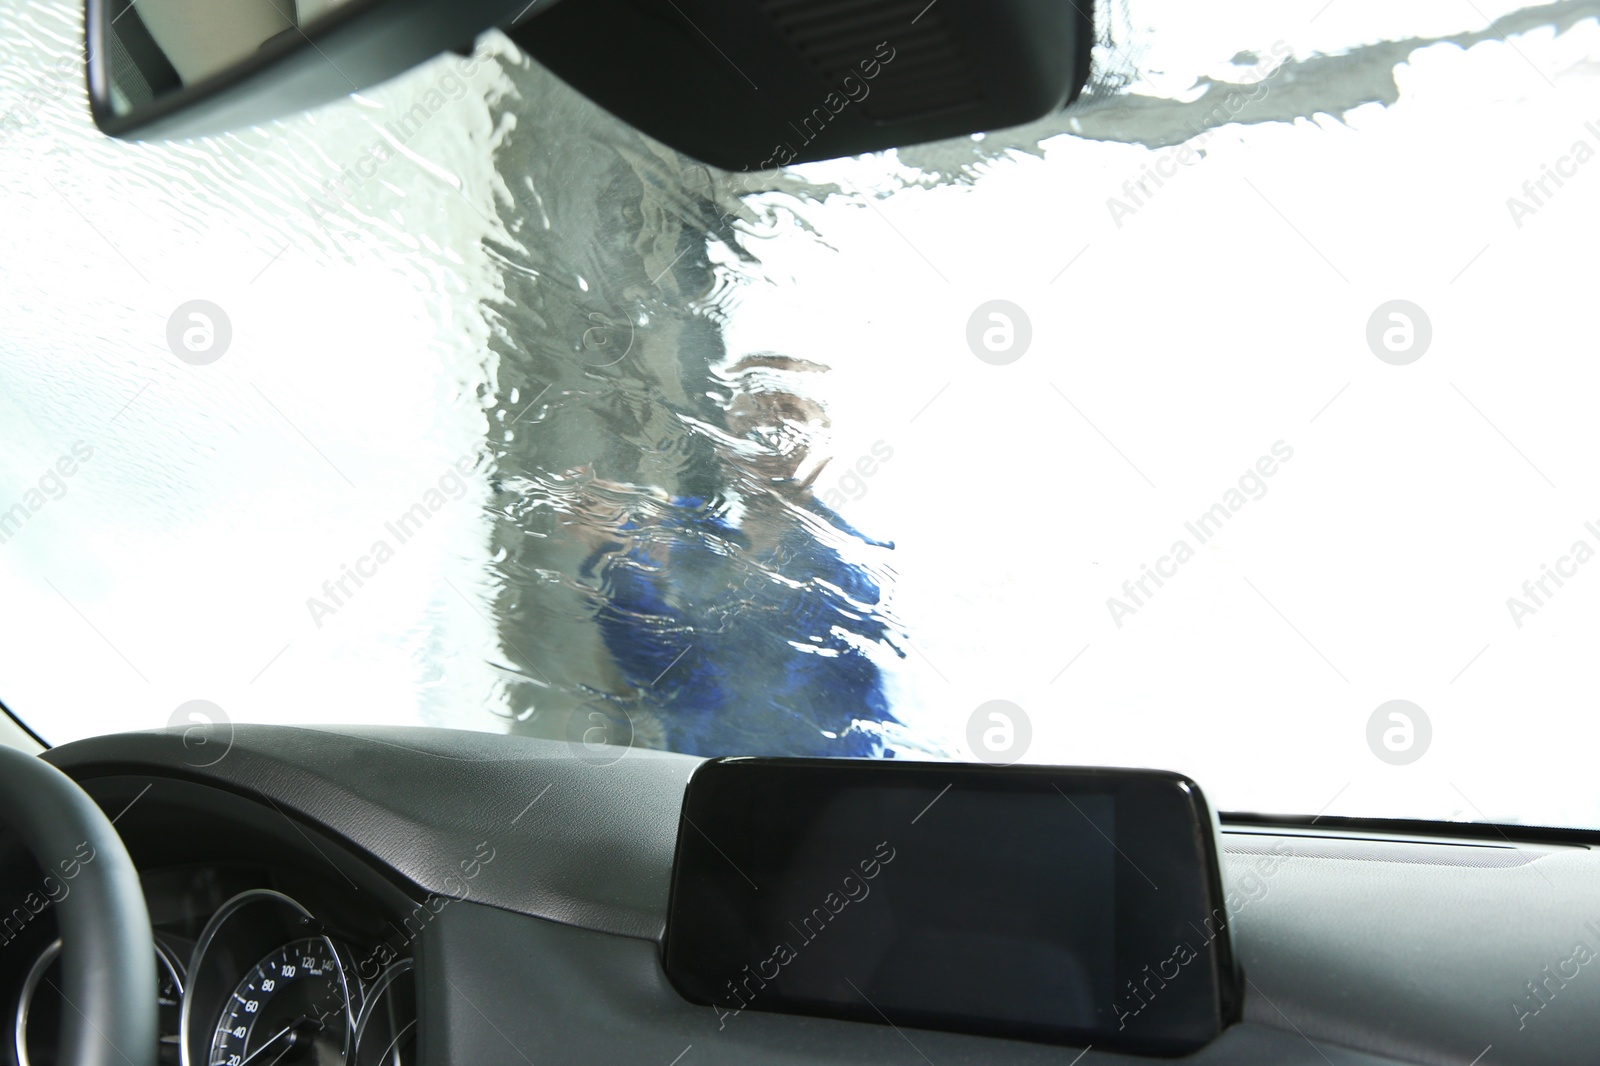 Photo of Worker cleaning automobile windshield with high pressure water jet at car wash, view from inside